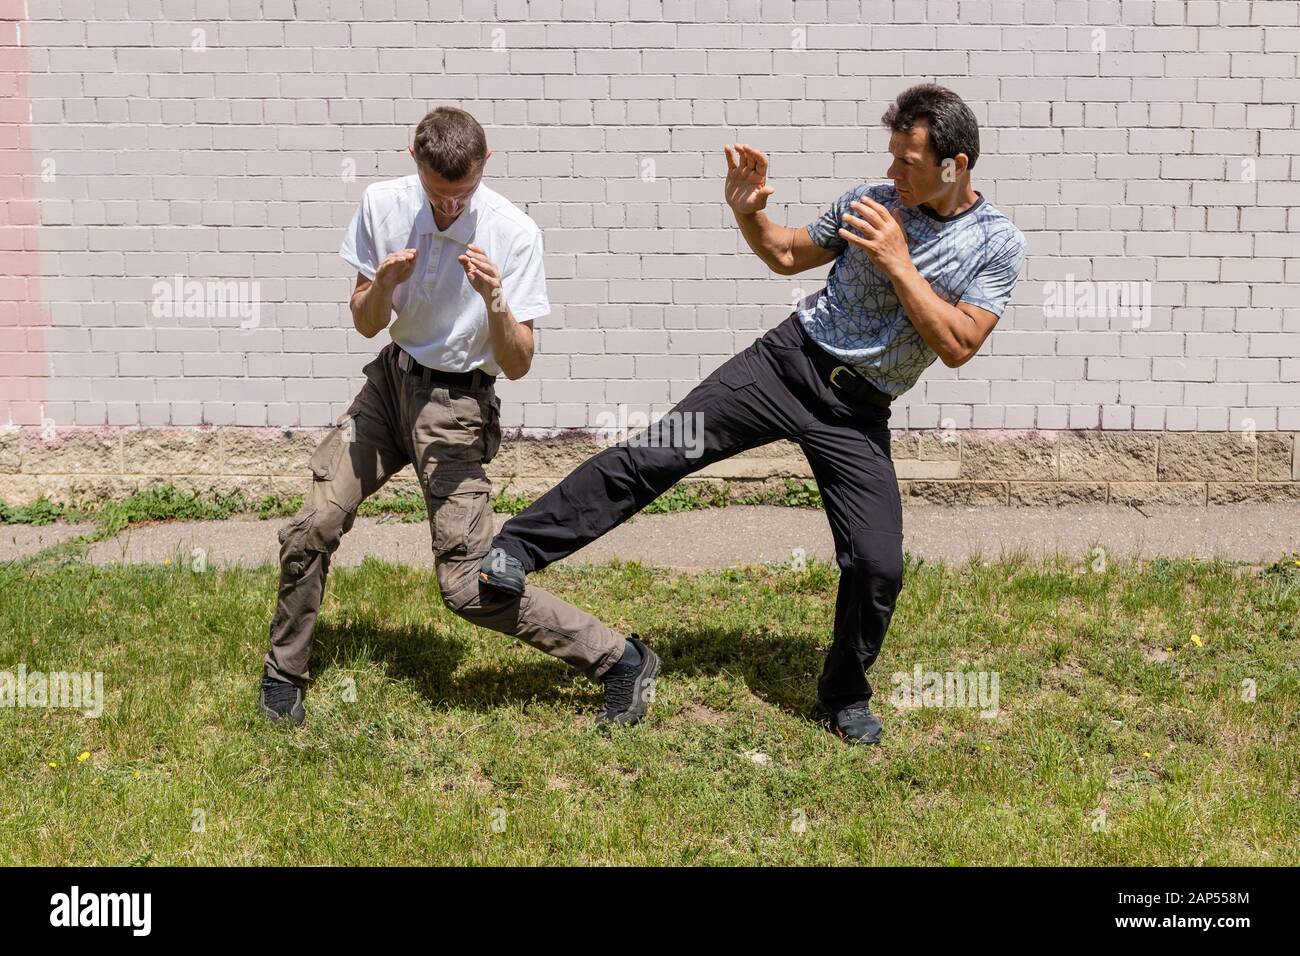 Defender Inflicts A Kick Under The Knee To The Attacker Self Defense Techniques Krav Maga Stock Photo Alamy